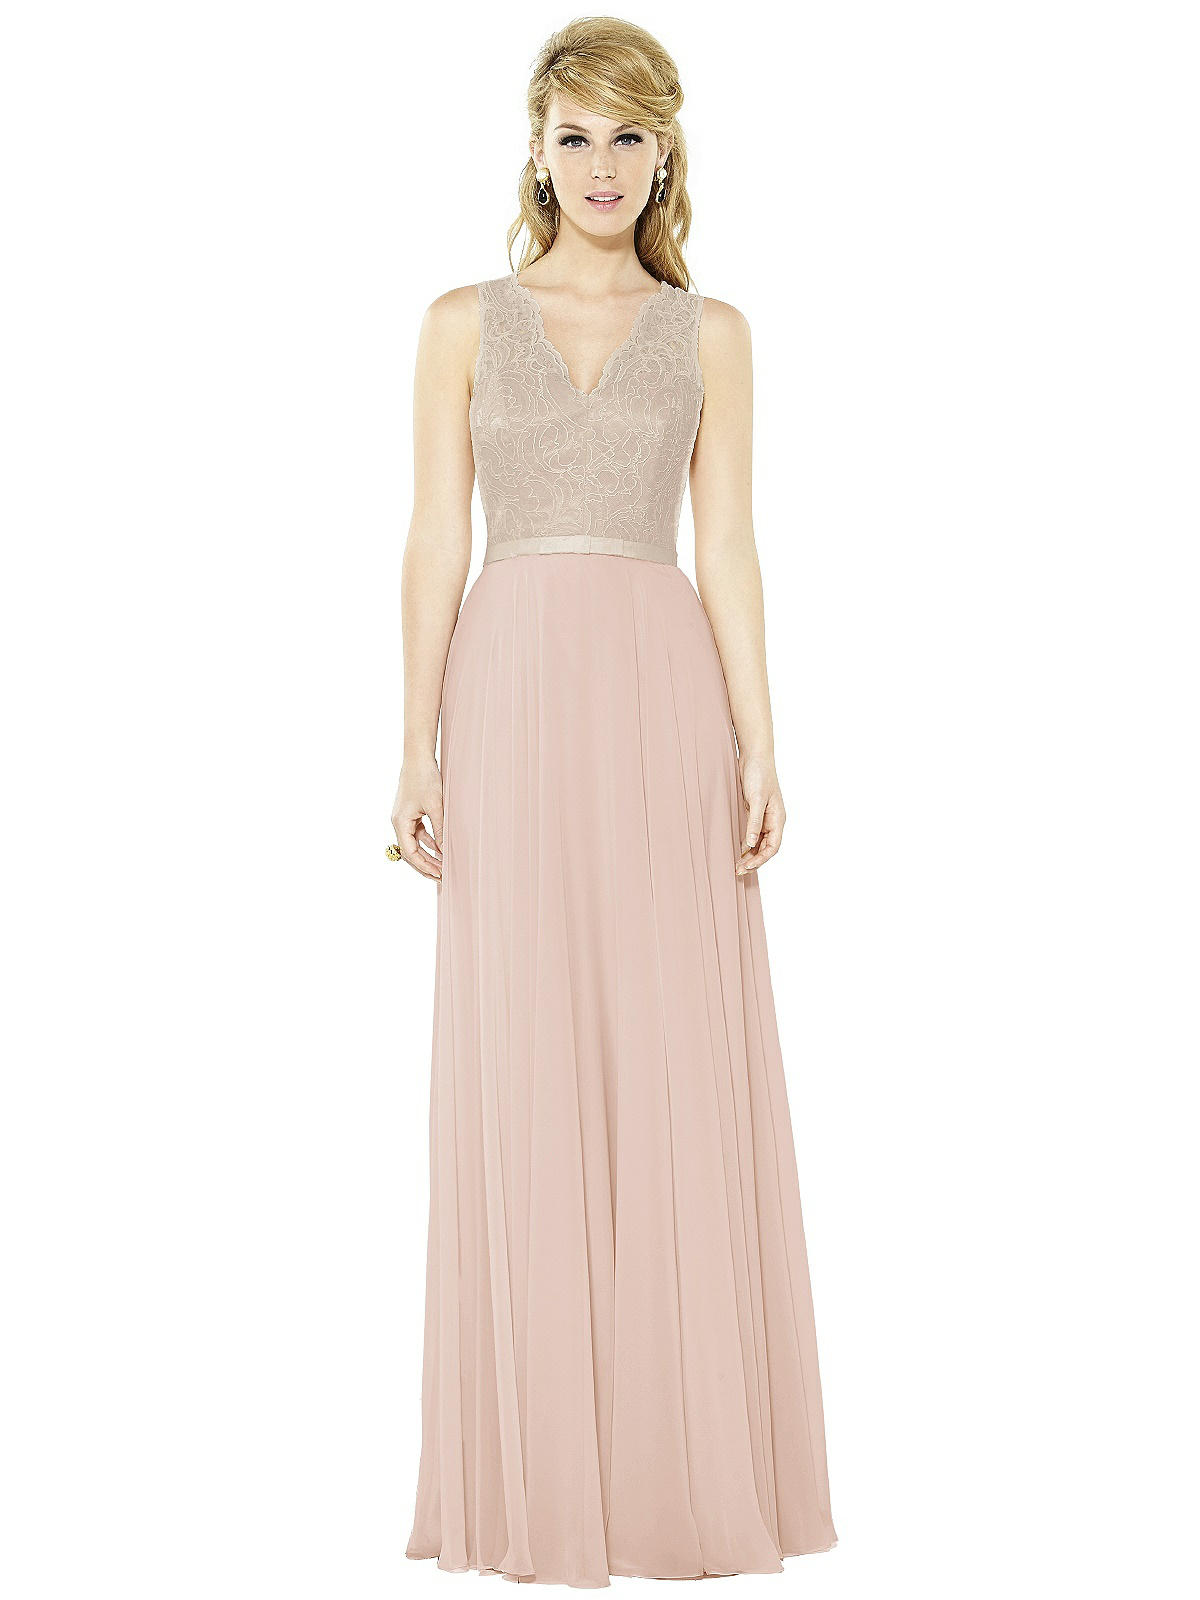 Dessy Collection Bridesmaid Dress 6715 The Dessy Group